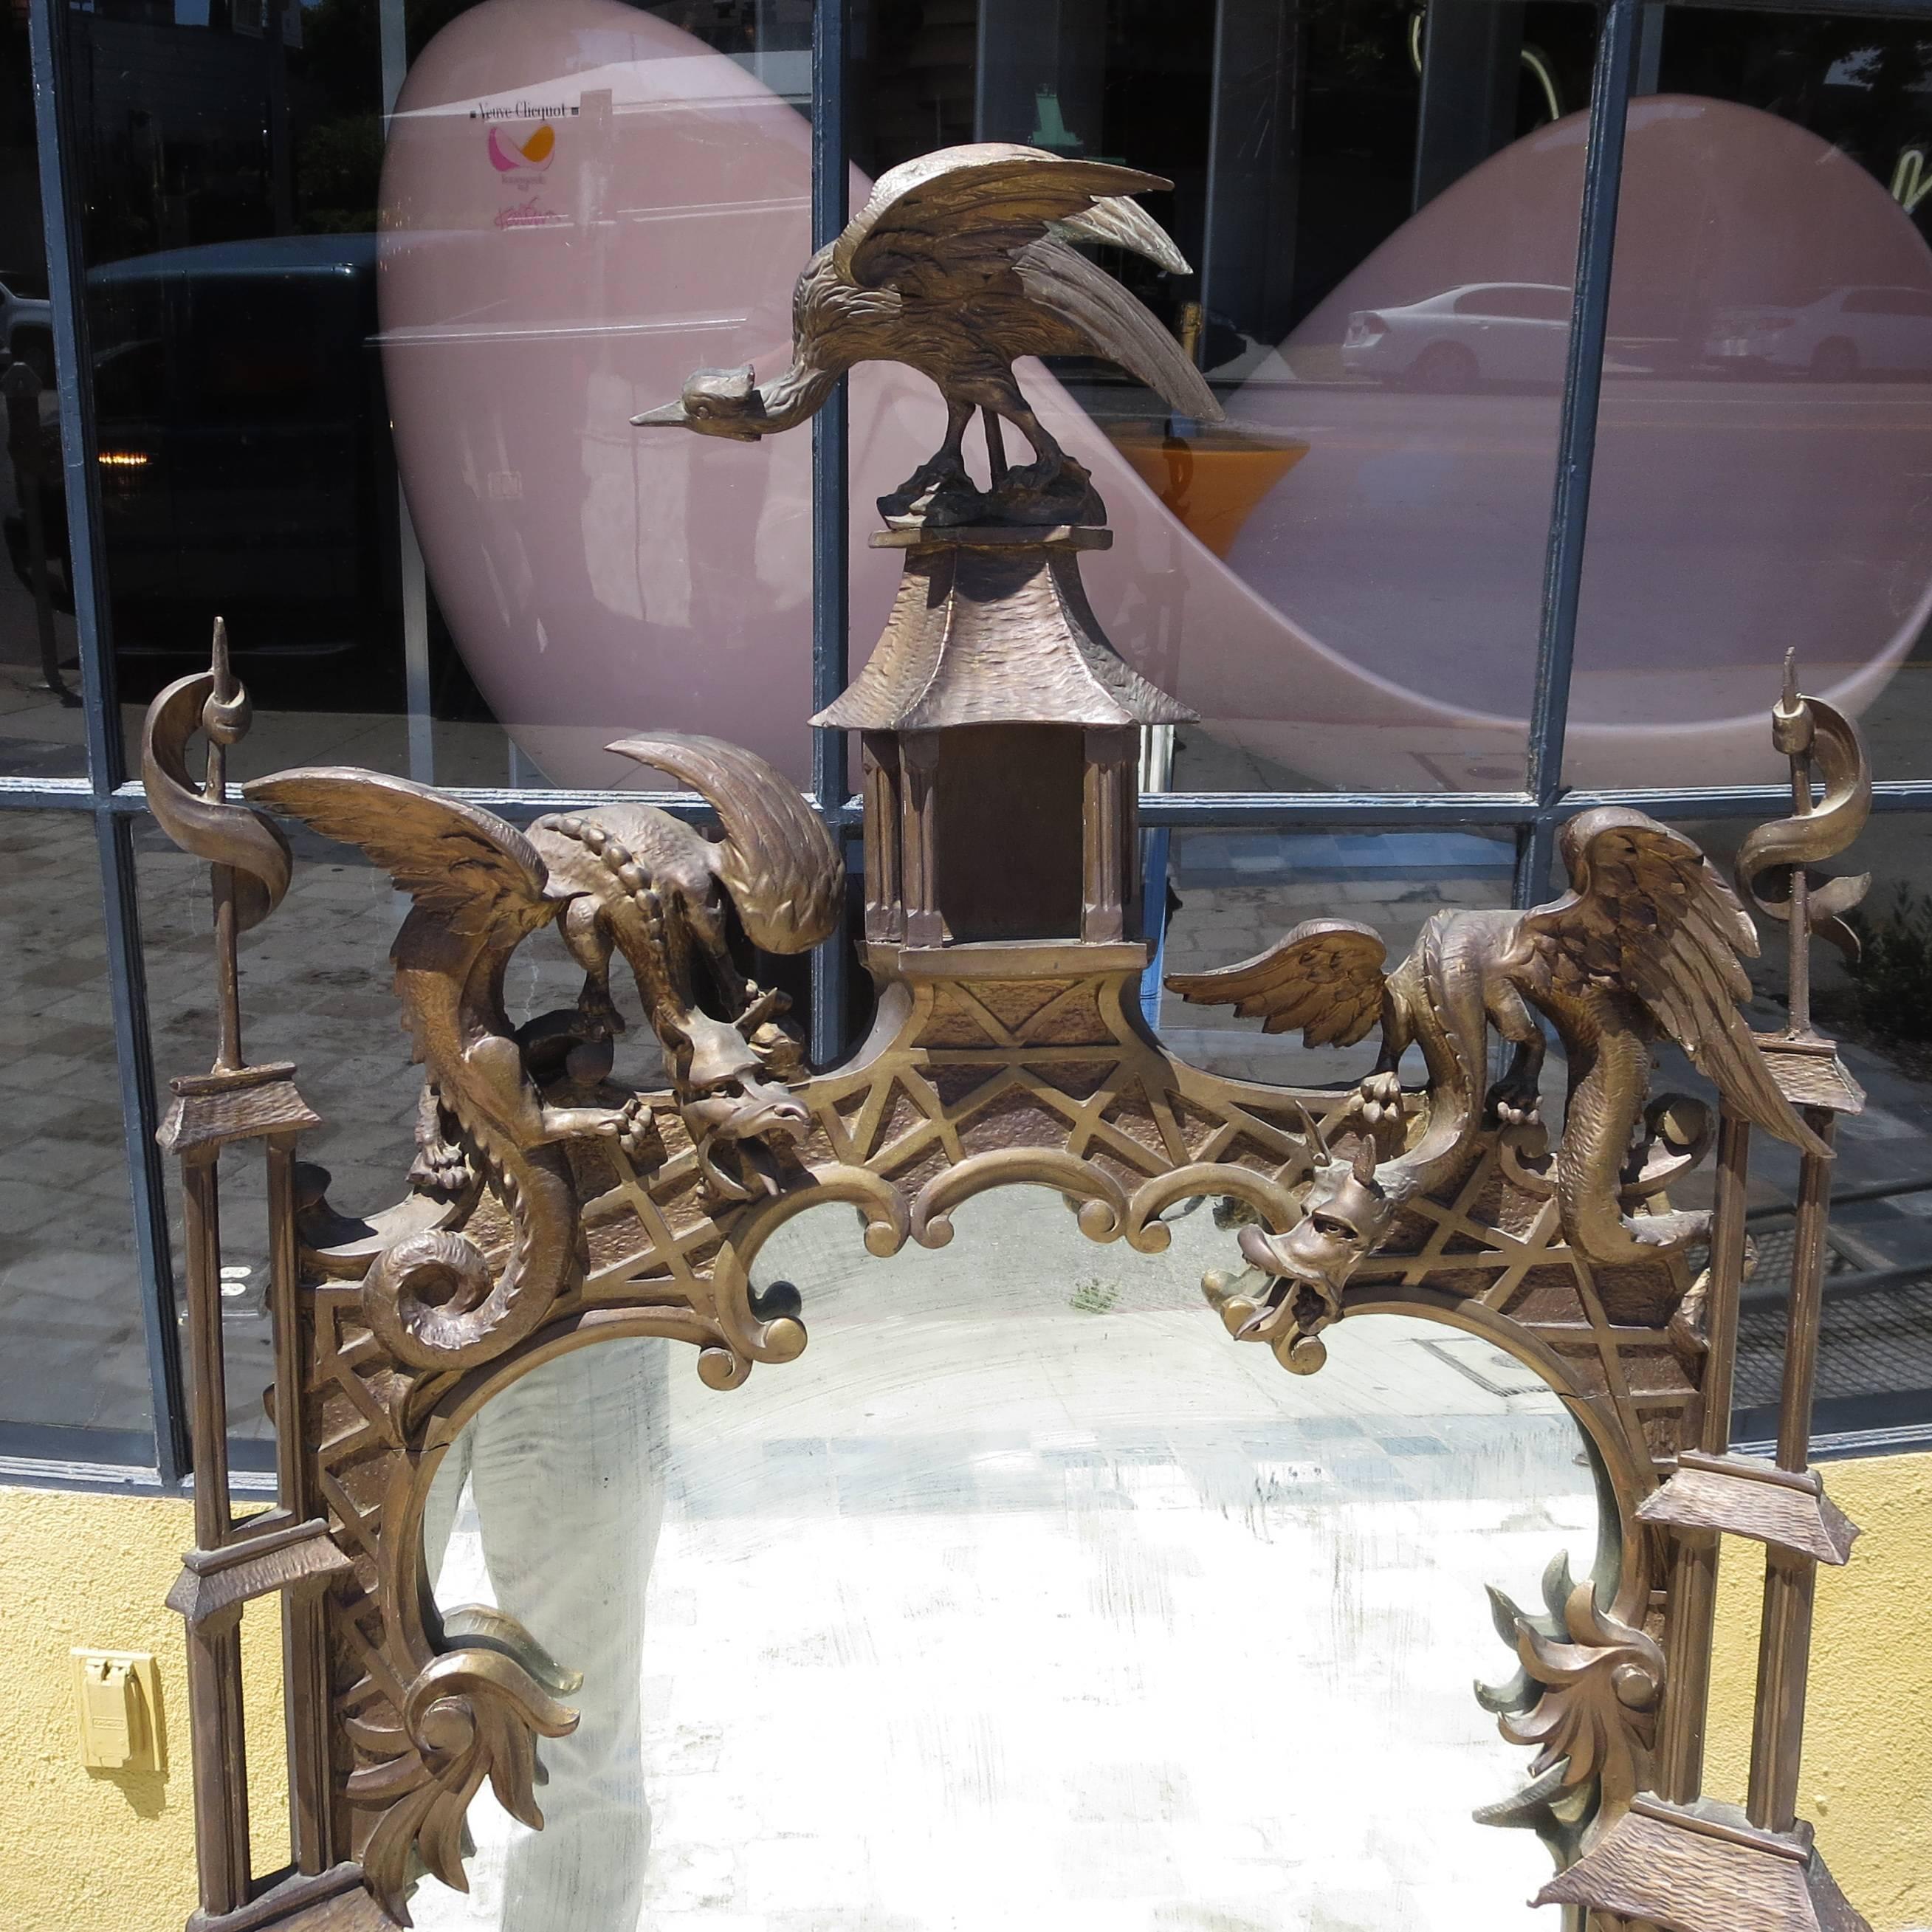 One of the best we have seen! This early 20th century mirror is finely carved with dragons, pagodas, a large bird in the centre, and a rickshaw scene at the bottom. The wood has an aged gold painted finish in good original condition. The mirror is